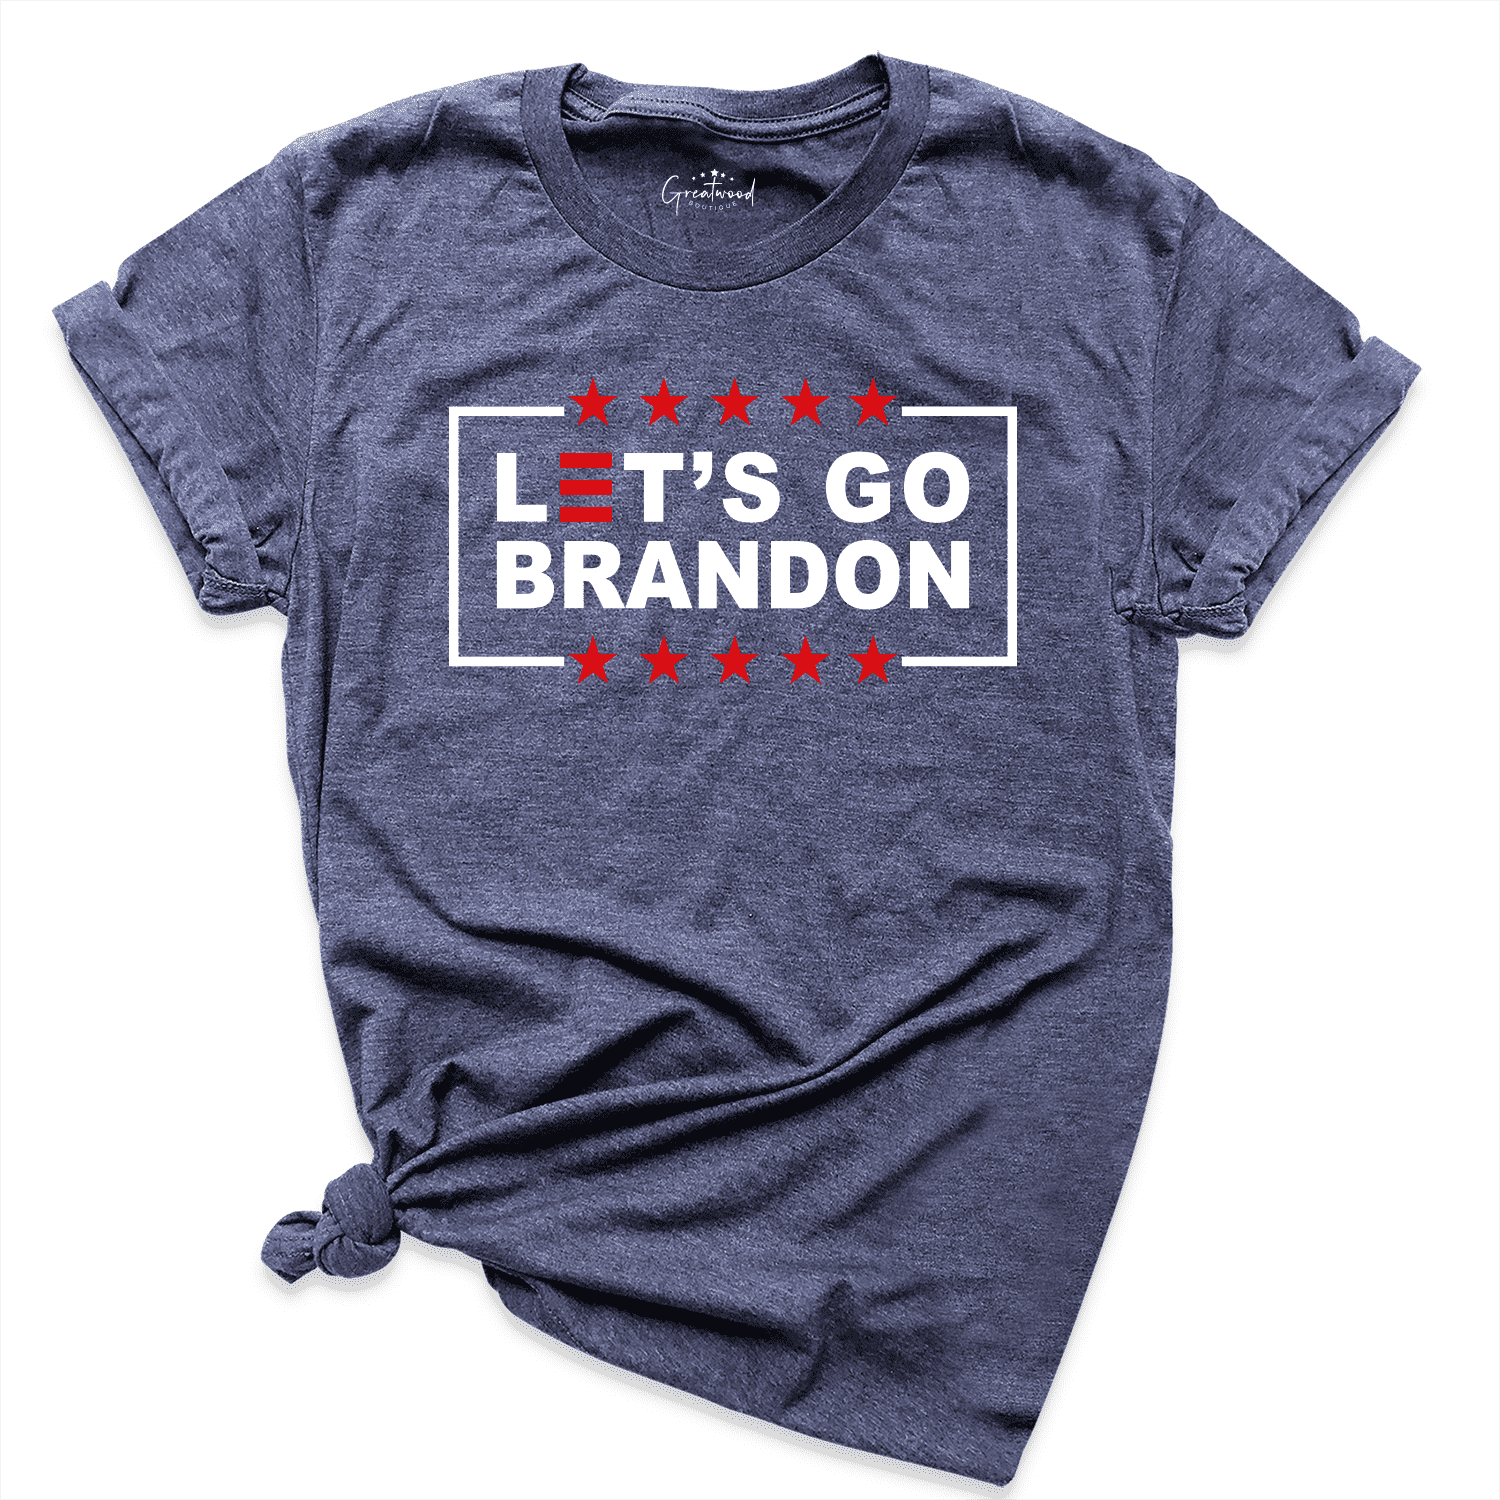 Lets Go Brandon Shirt Navy - Greatwood Boutique